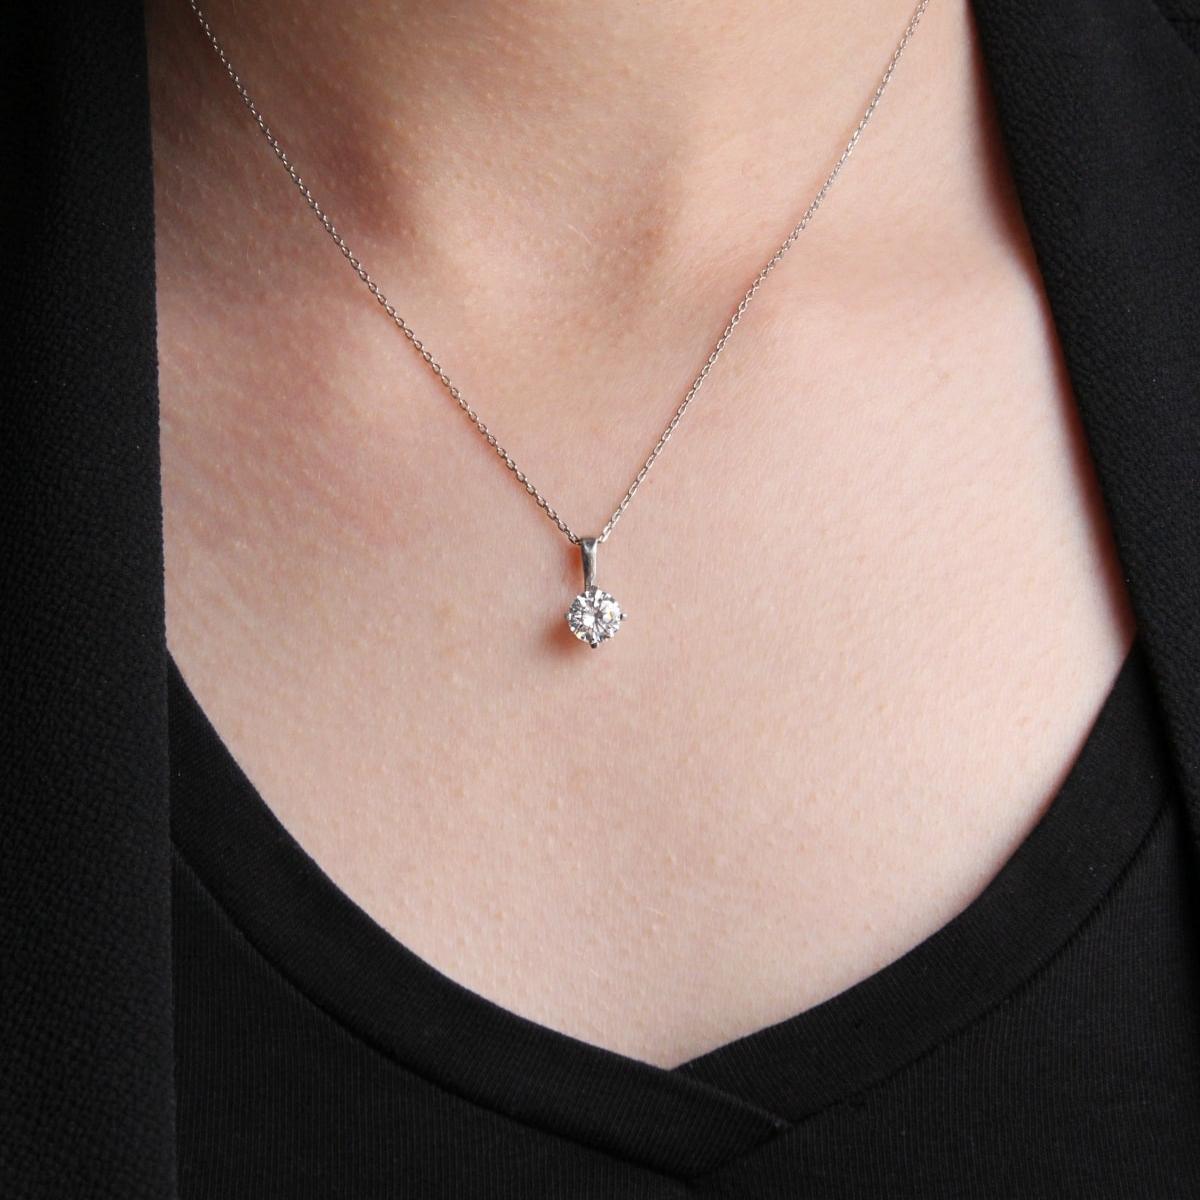 Solitaire Diamond Pendant Necklace • Diamond Solitaire Necklace - Trending Silver Gifts